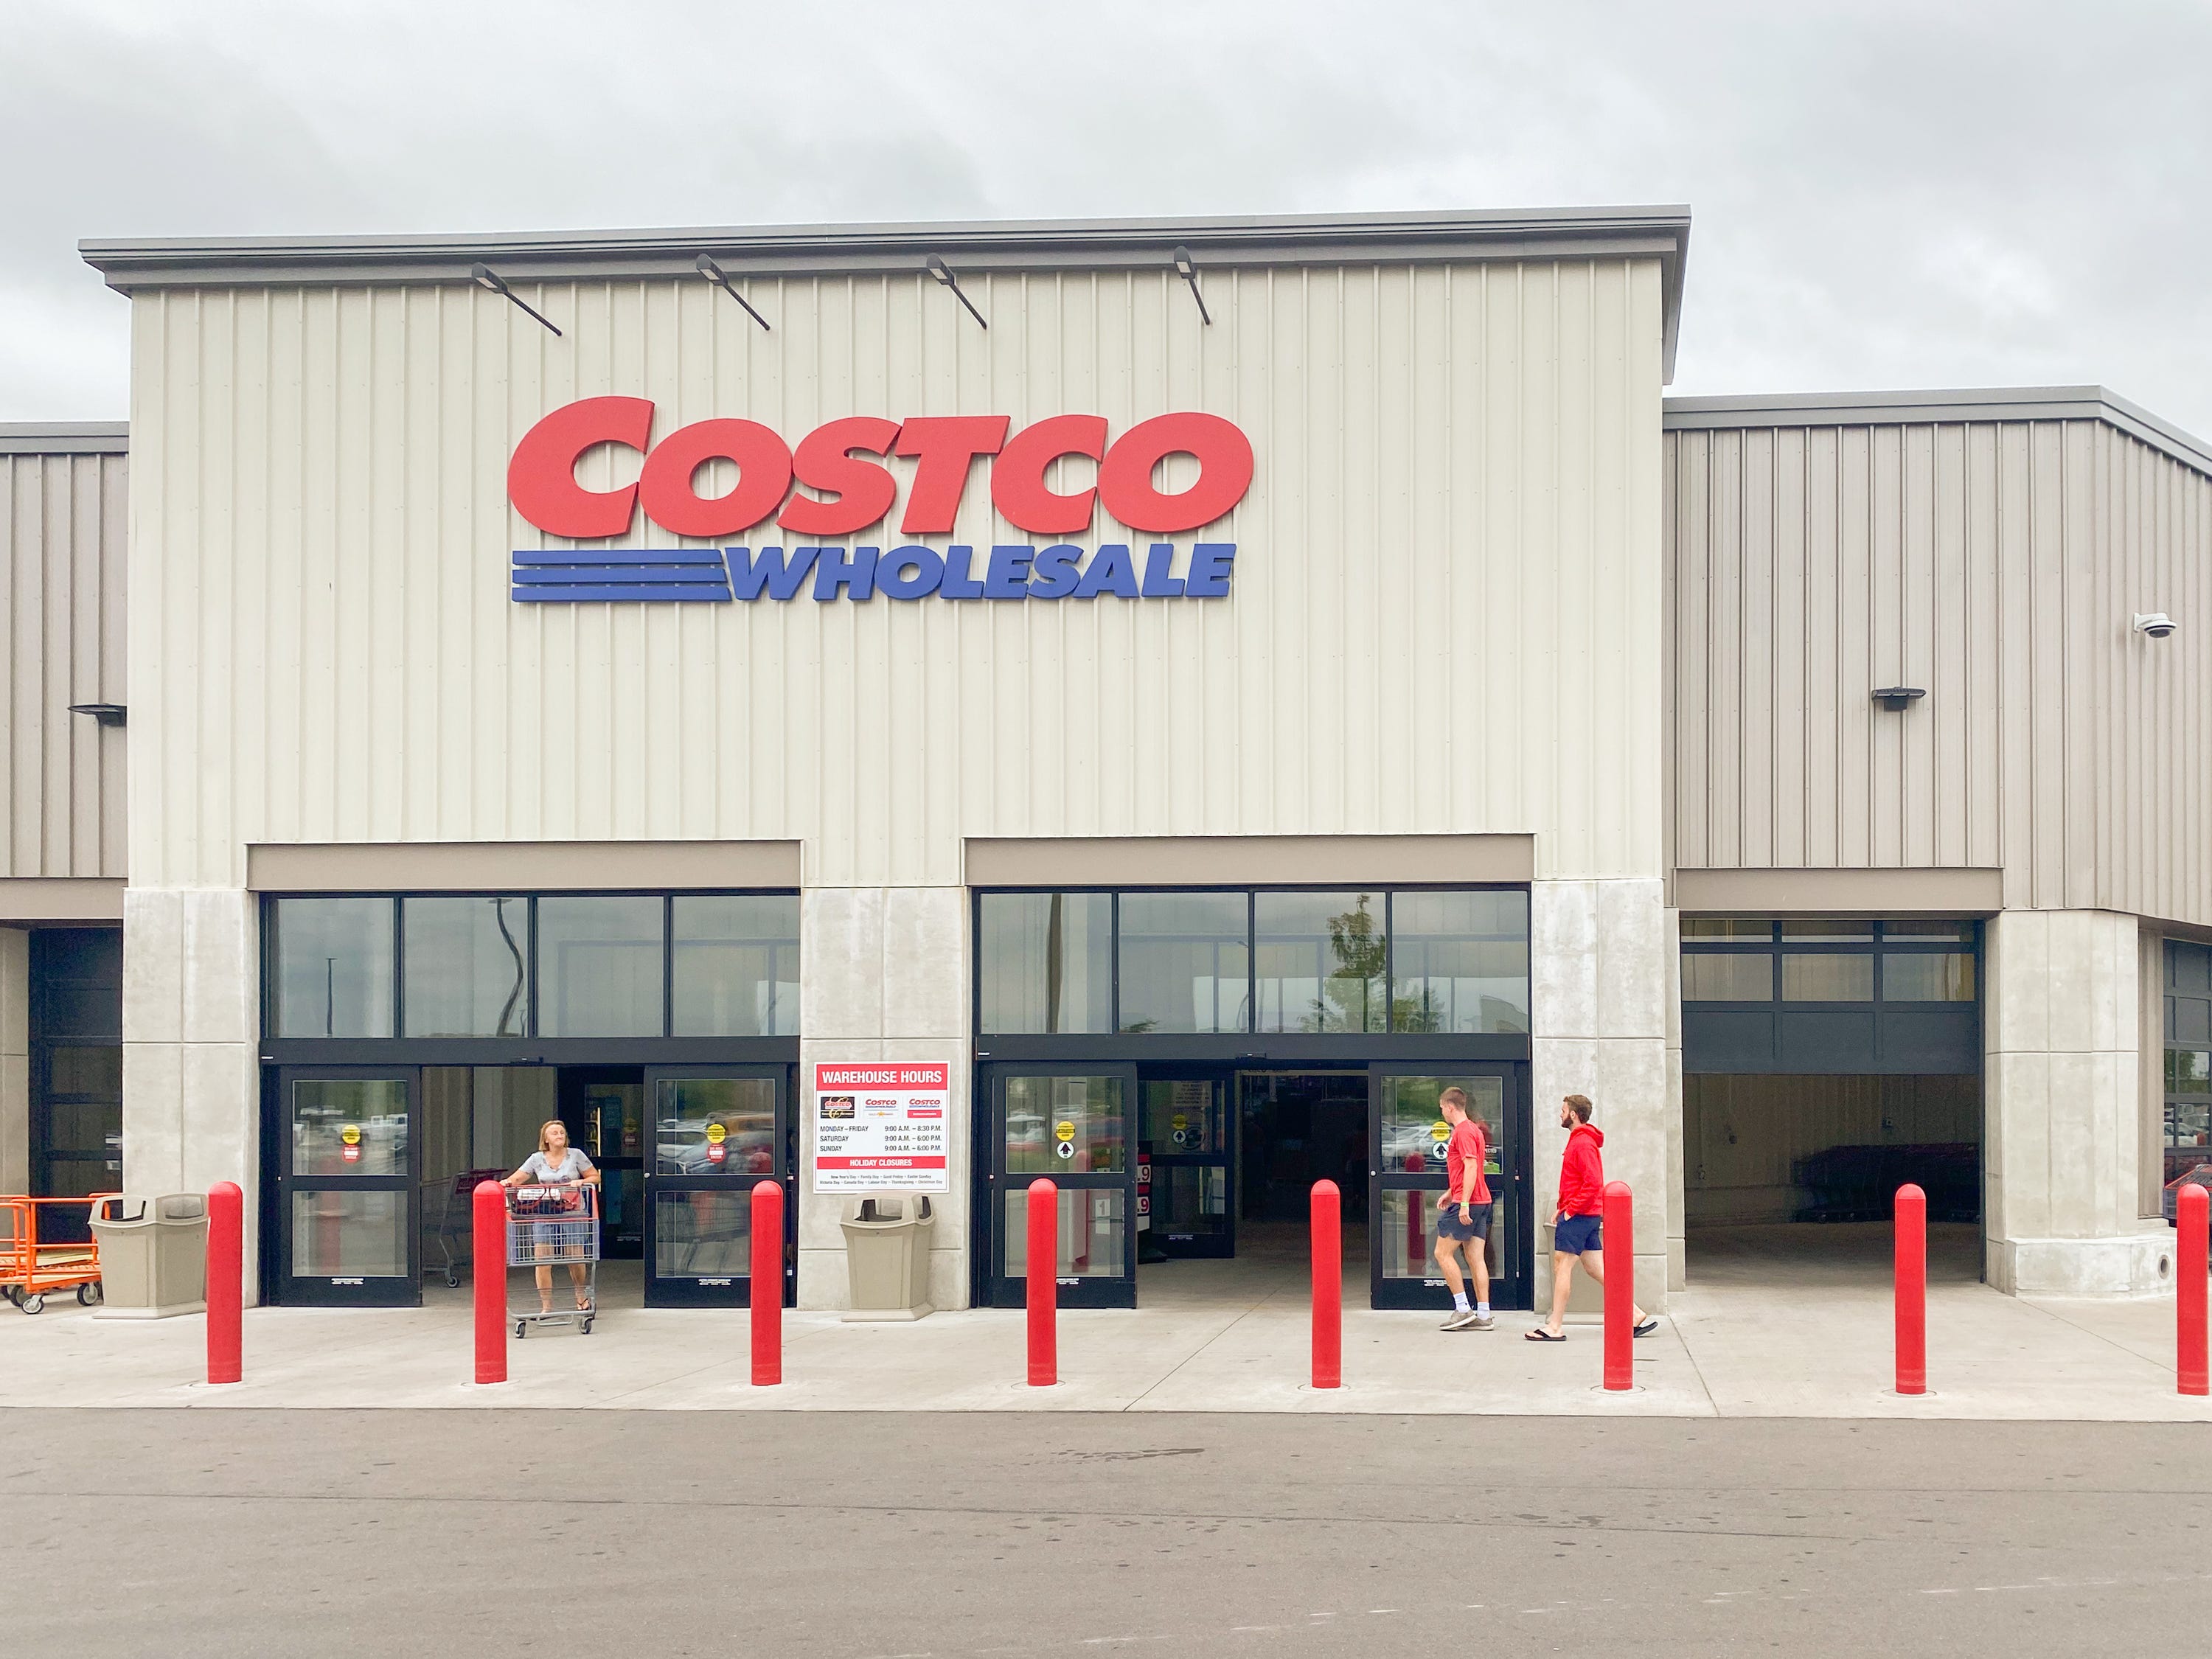 <p>Although I was outside of the US, visiting Costco in Canada felt like a taste of home. With a nearly identical layout to the American stores I've been to, I felt transported to my childhood as I strolled the aisles. </p><p>If I ever find myself in a Canadian Costco again, I'll pick up some Aero, Tim Horton's coffee, and poutine. </p>